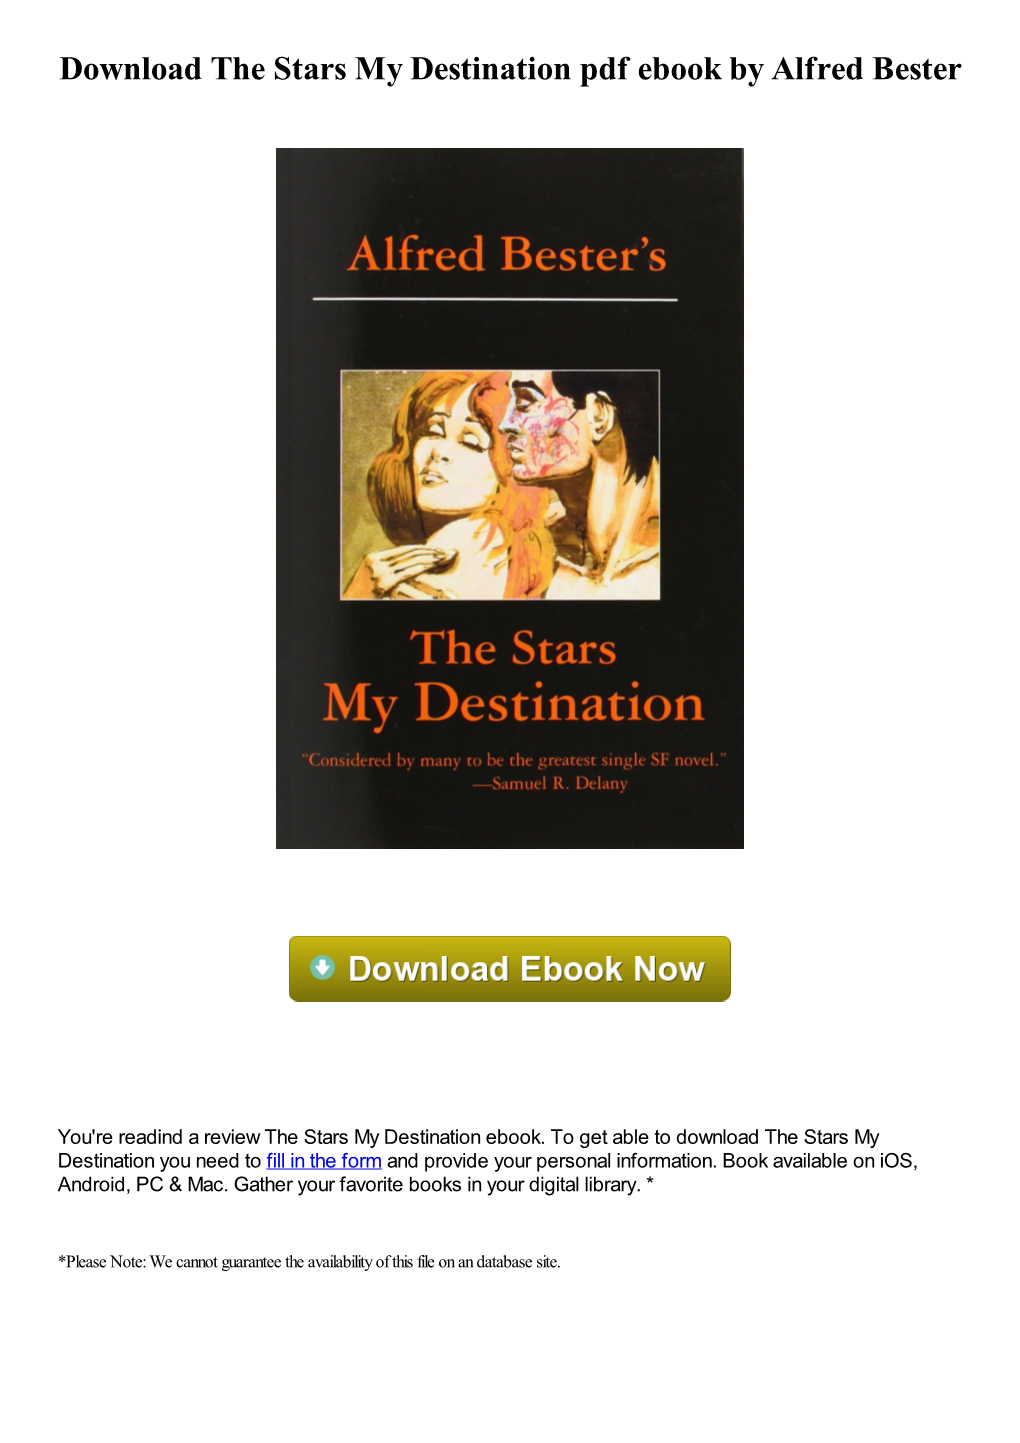 Download the Stars My Destination Pdf Ebook by Alfred Bester